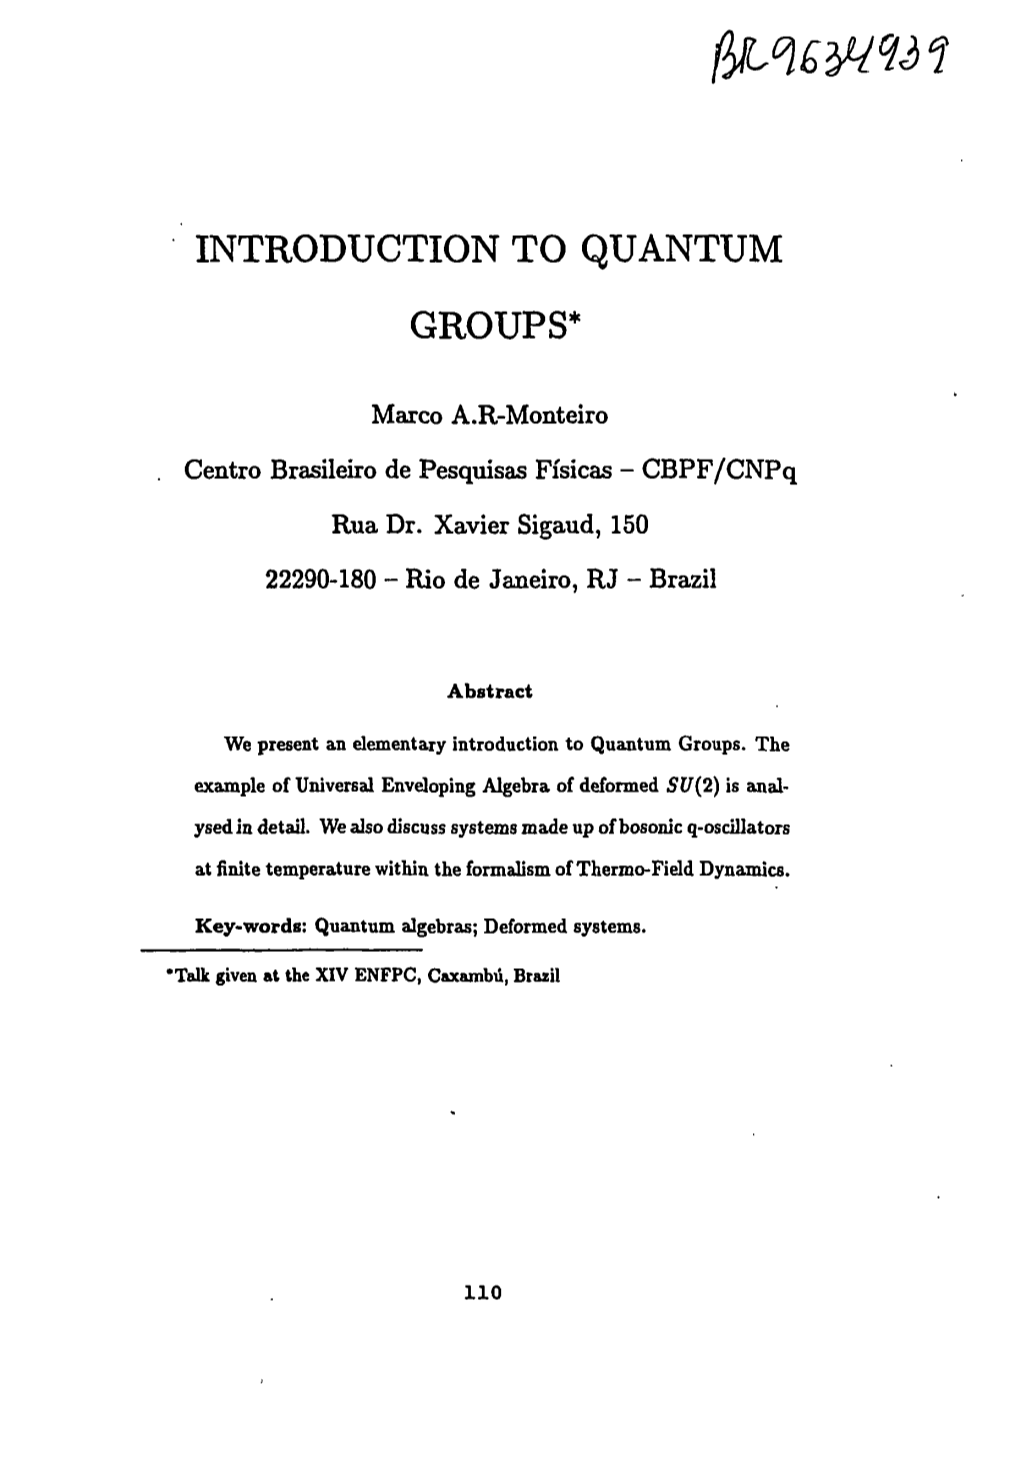 Introduction to Quantum Groups*